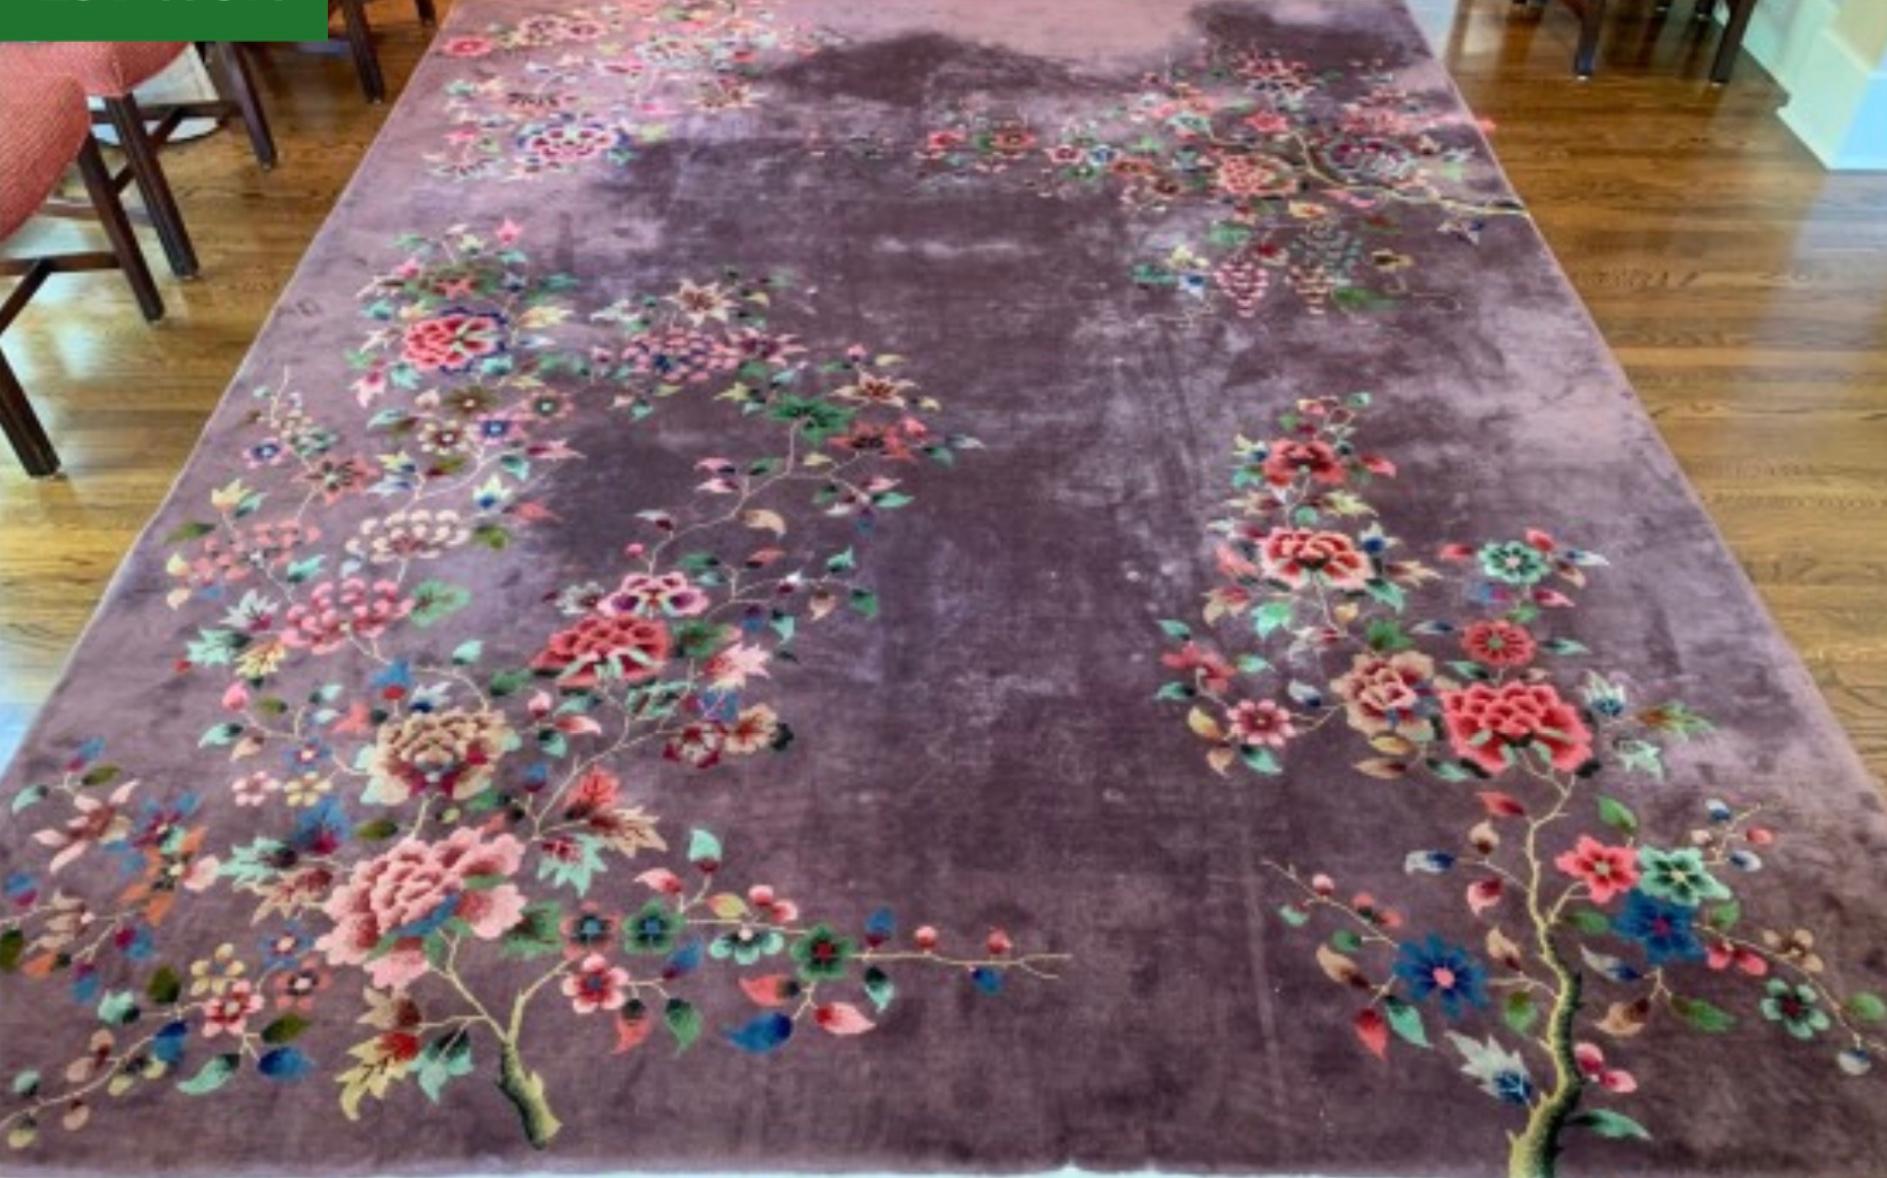 Early 20th century Chinese Deco rug, signed, full-pile, hand knotted, ends and sides complete. Stunning mellow, warm purple color from aged, natural iron oxide purple dye, identifiable by soft, warm tone and areas of 